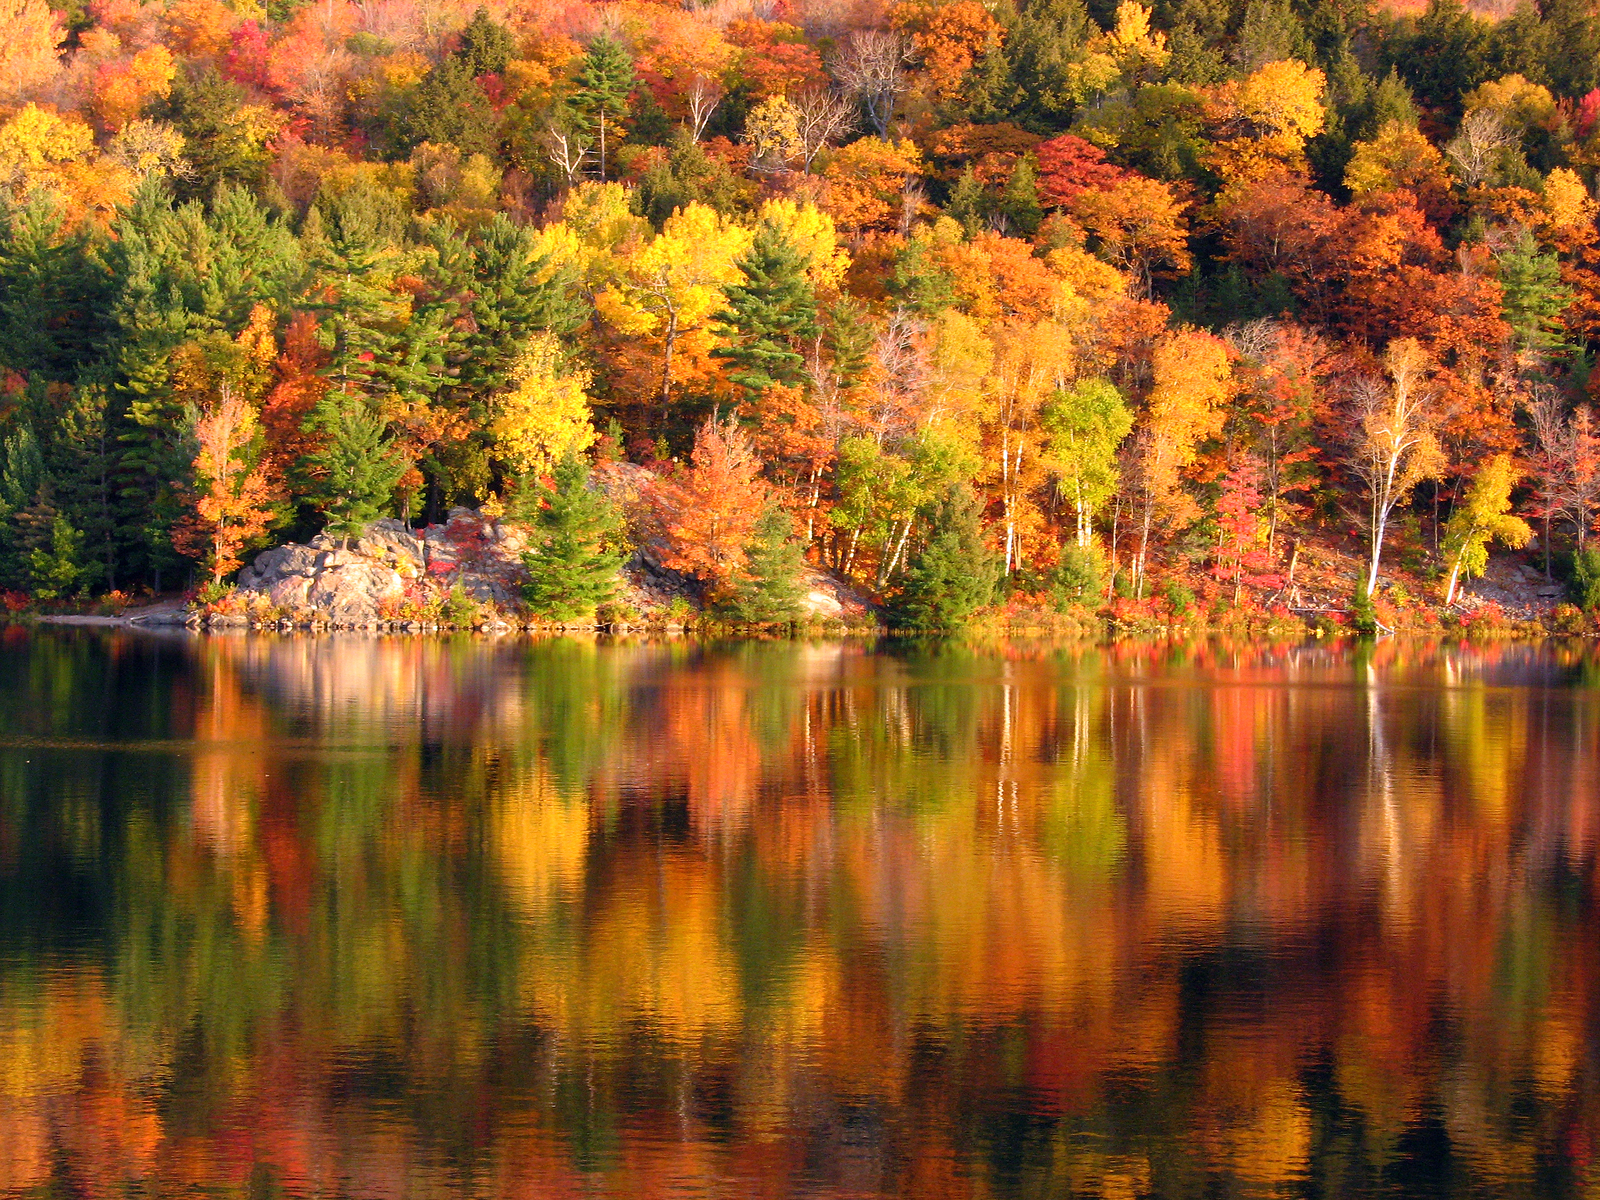 Best Places In The World For Fall Foliage | SkyMed